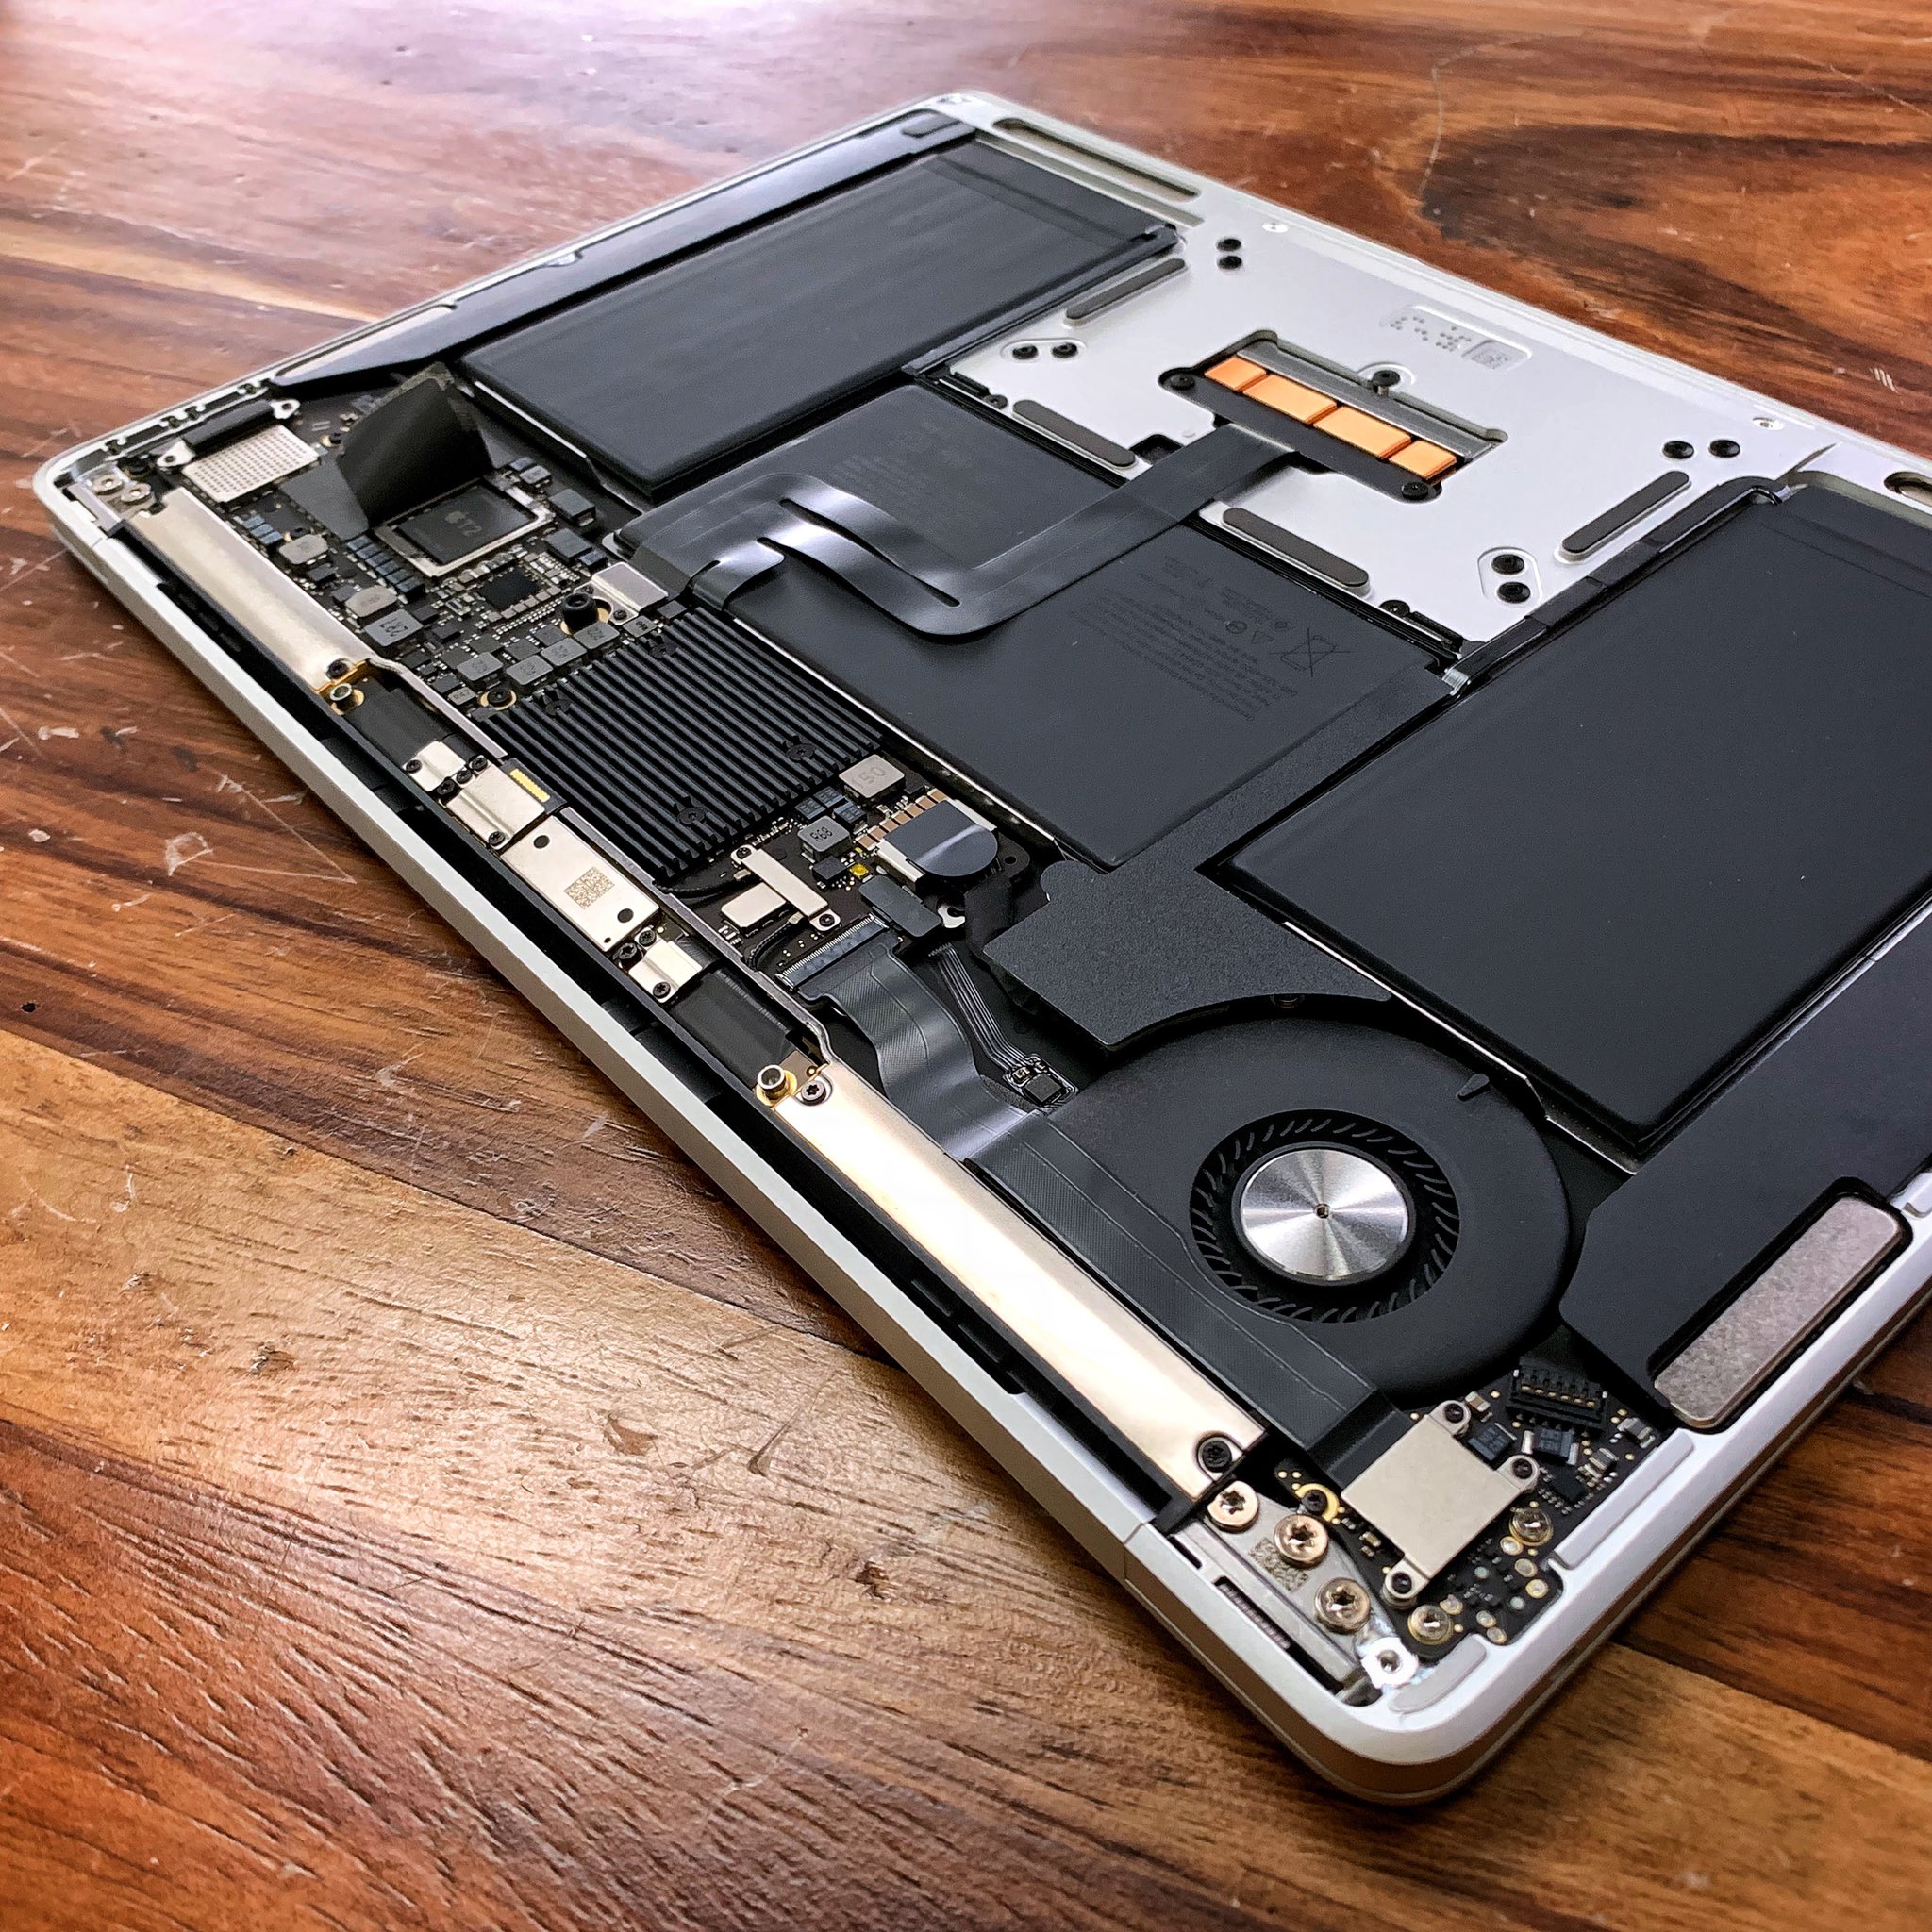 Austin Evans on Twitter: "Inside the new MacBook Air. Tiny fan, T2 chip and a VERY clean layout. 👌 /